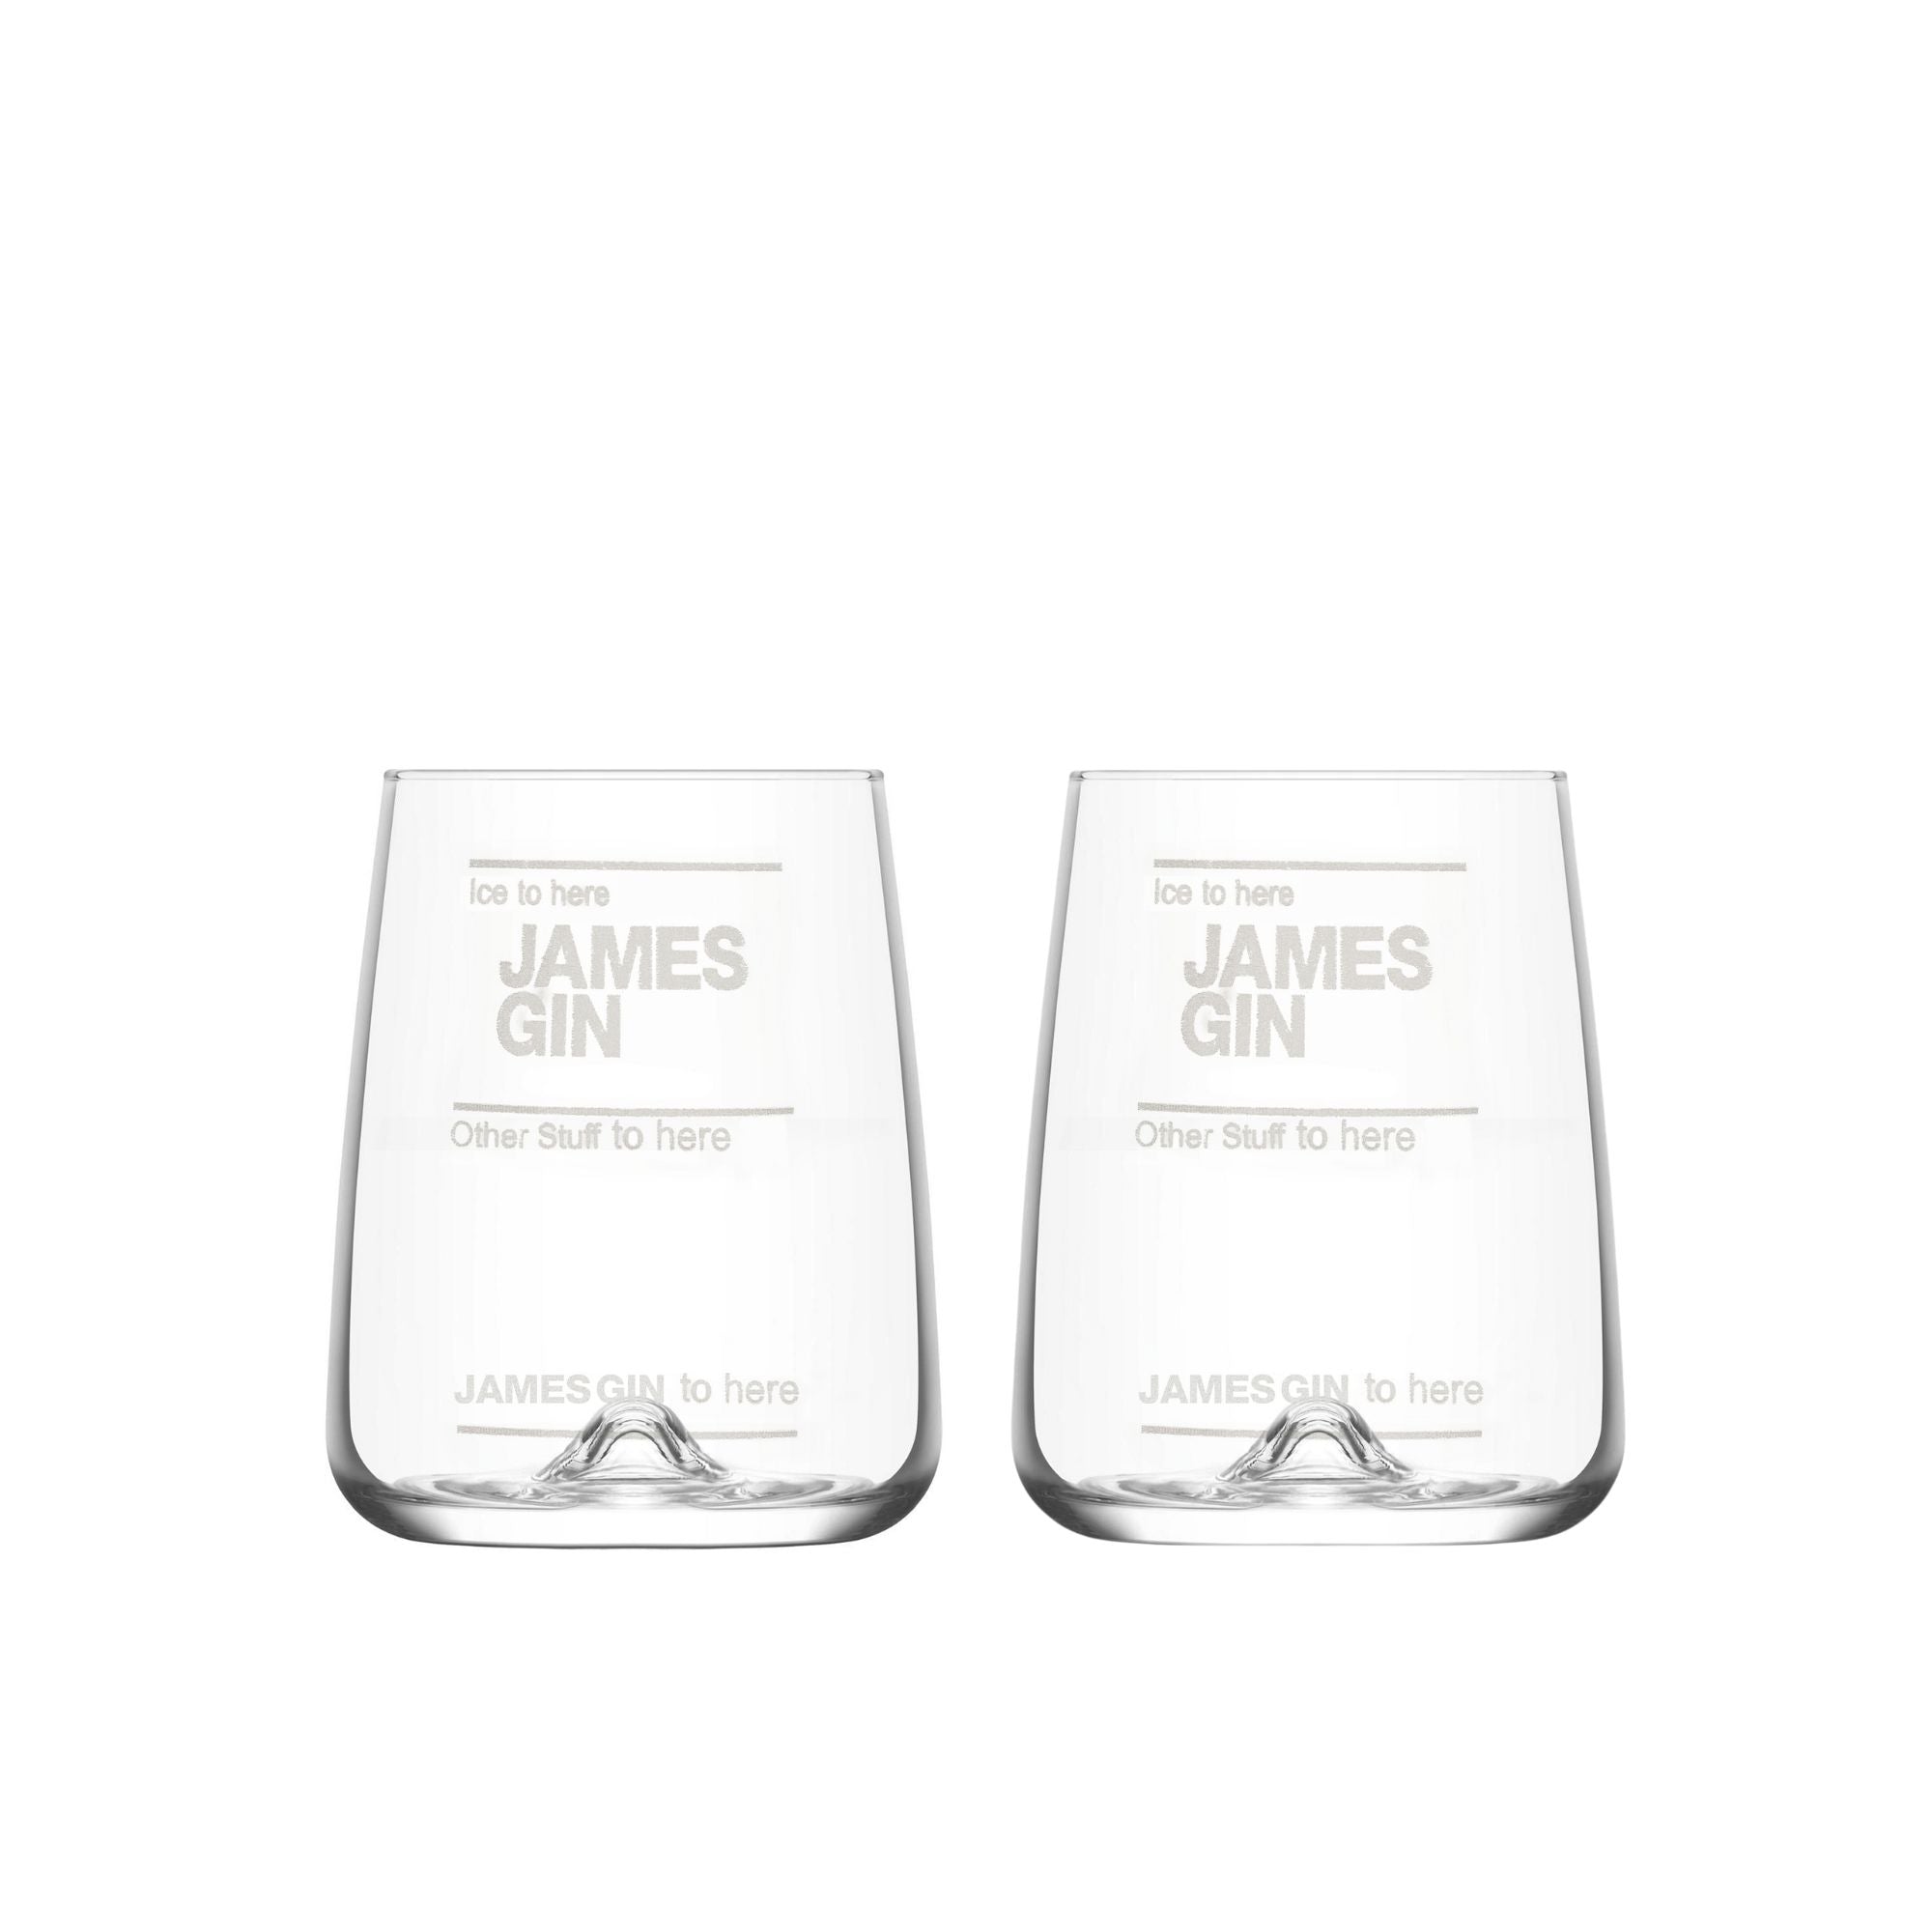 The James Gin Generic Cocktail Mixing Glasses